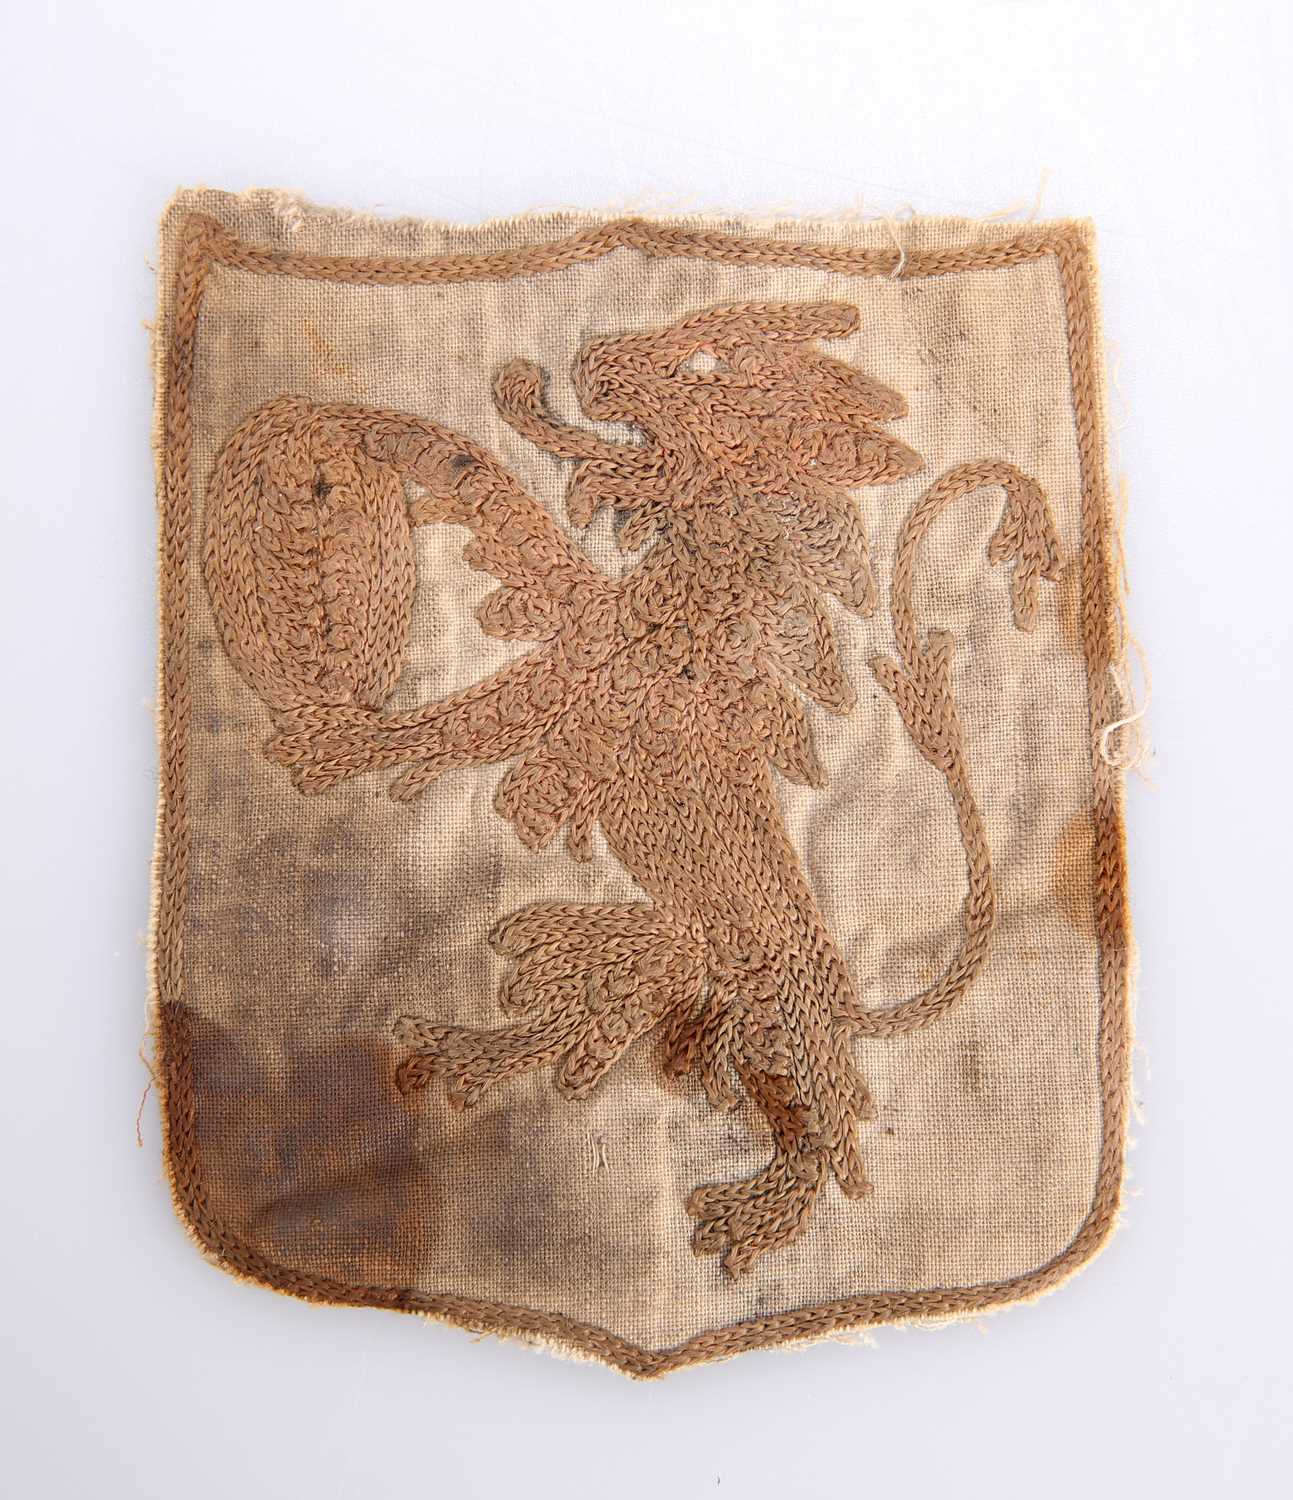 AN ANTIQUE EMBROIDERED HERALDIC BADGE PENDANT